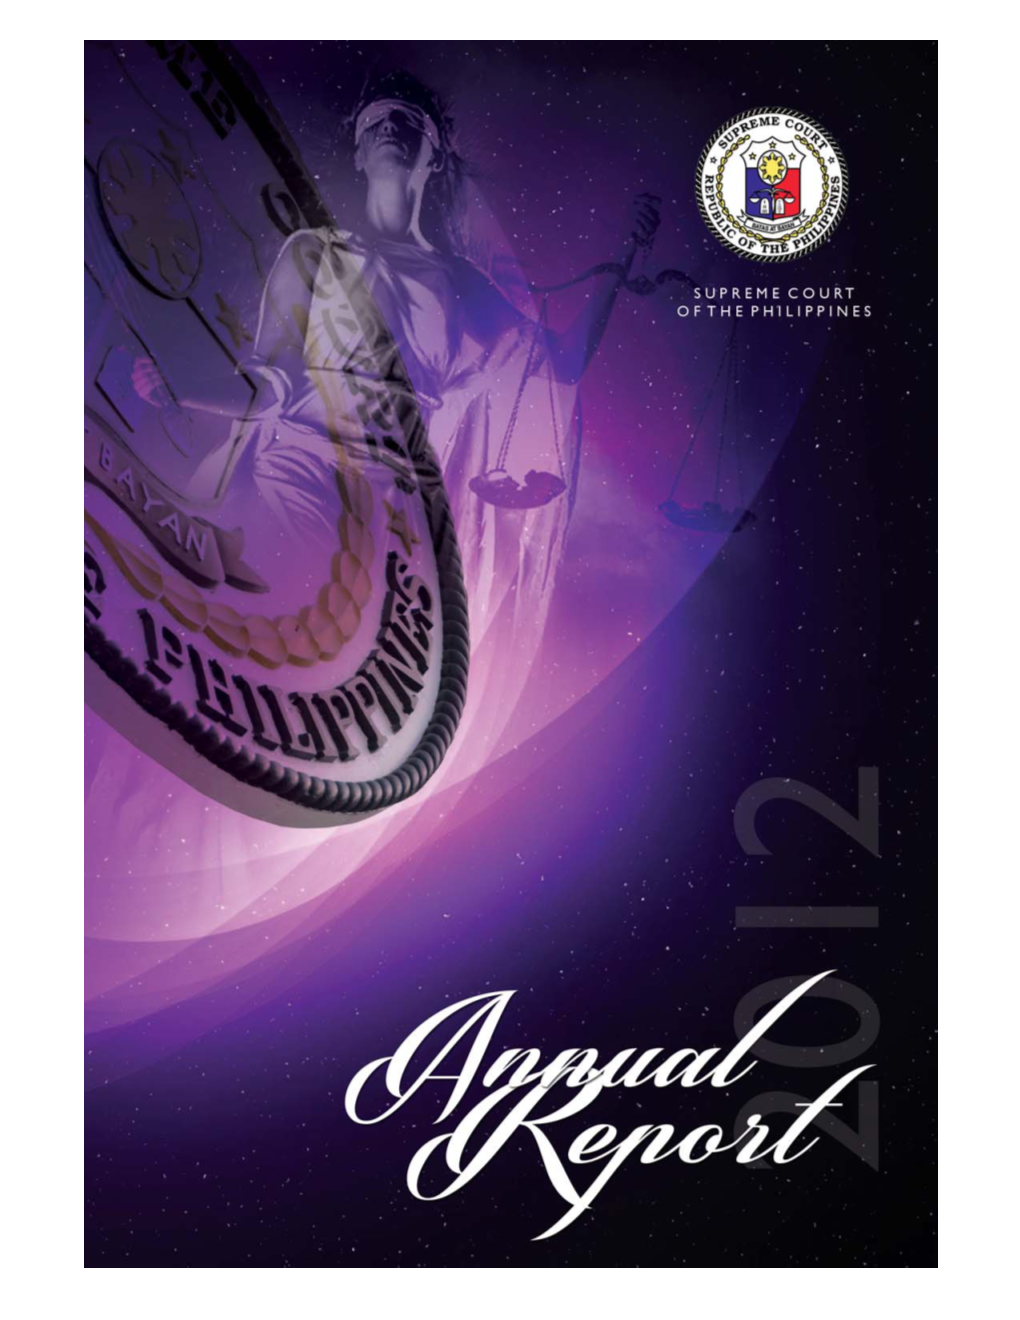 2012 Annual Report | Supreme Court of the Philippines